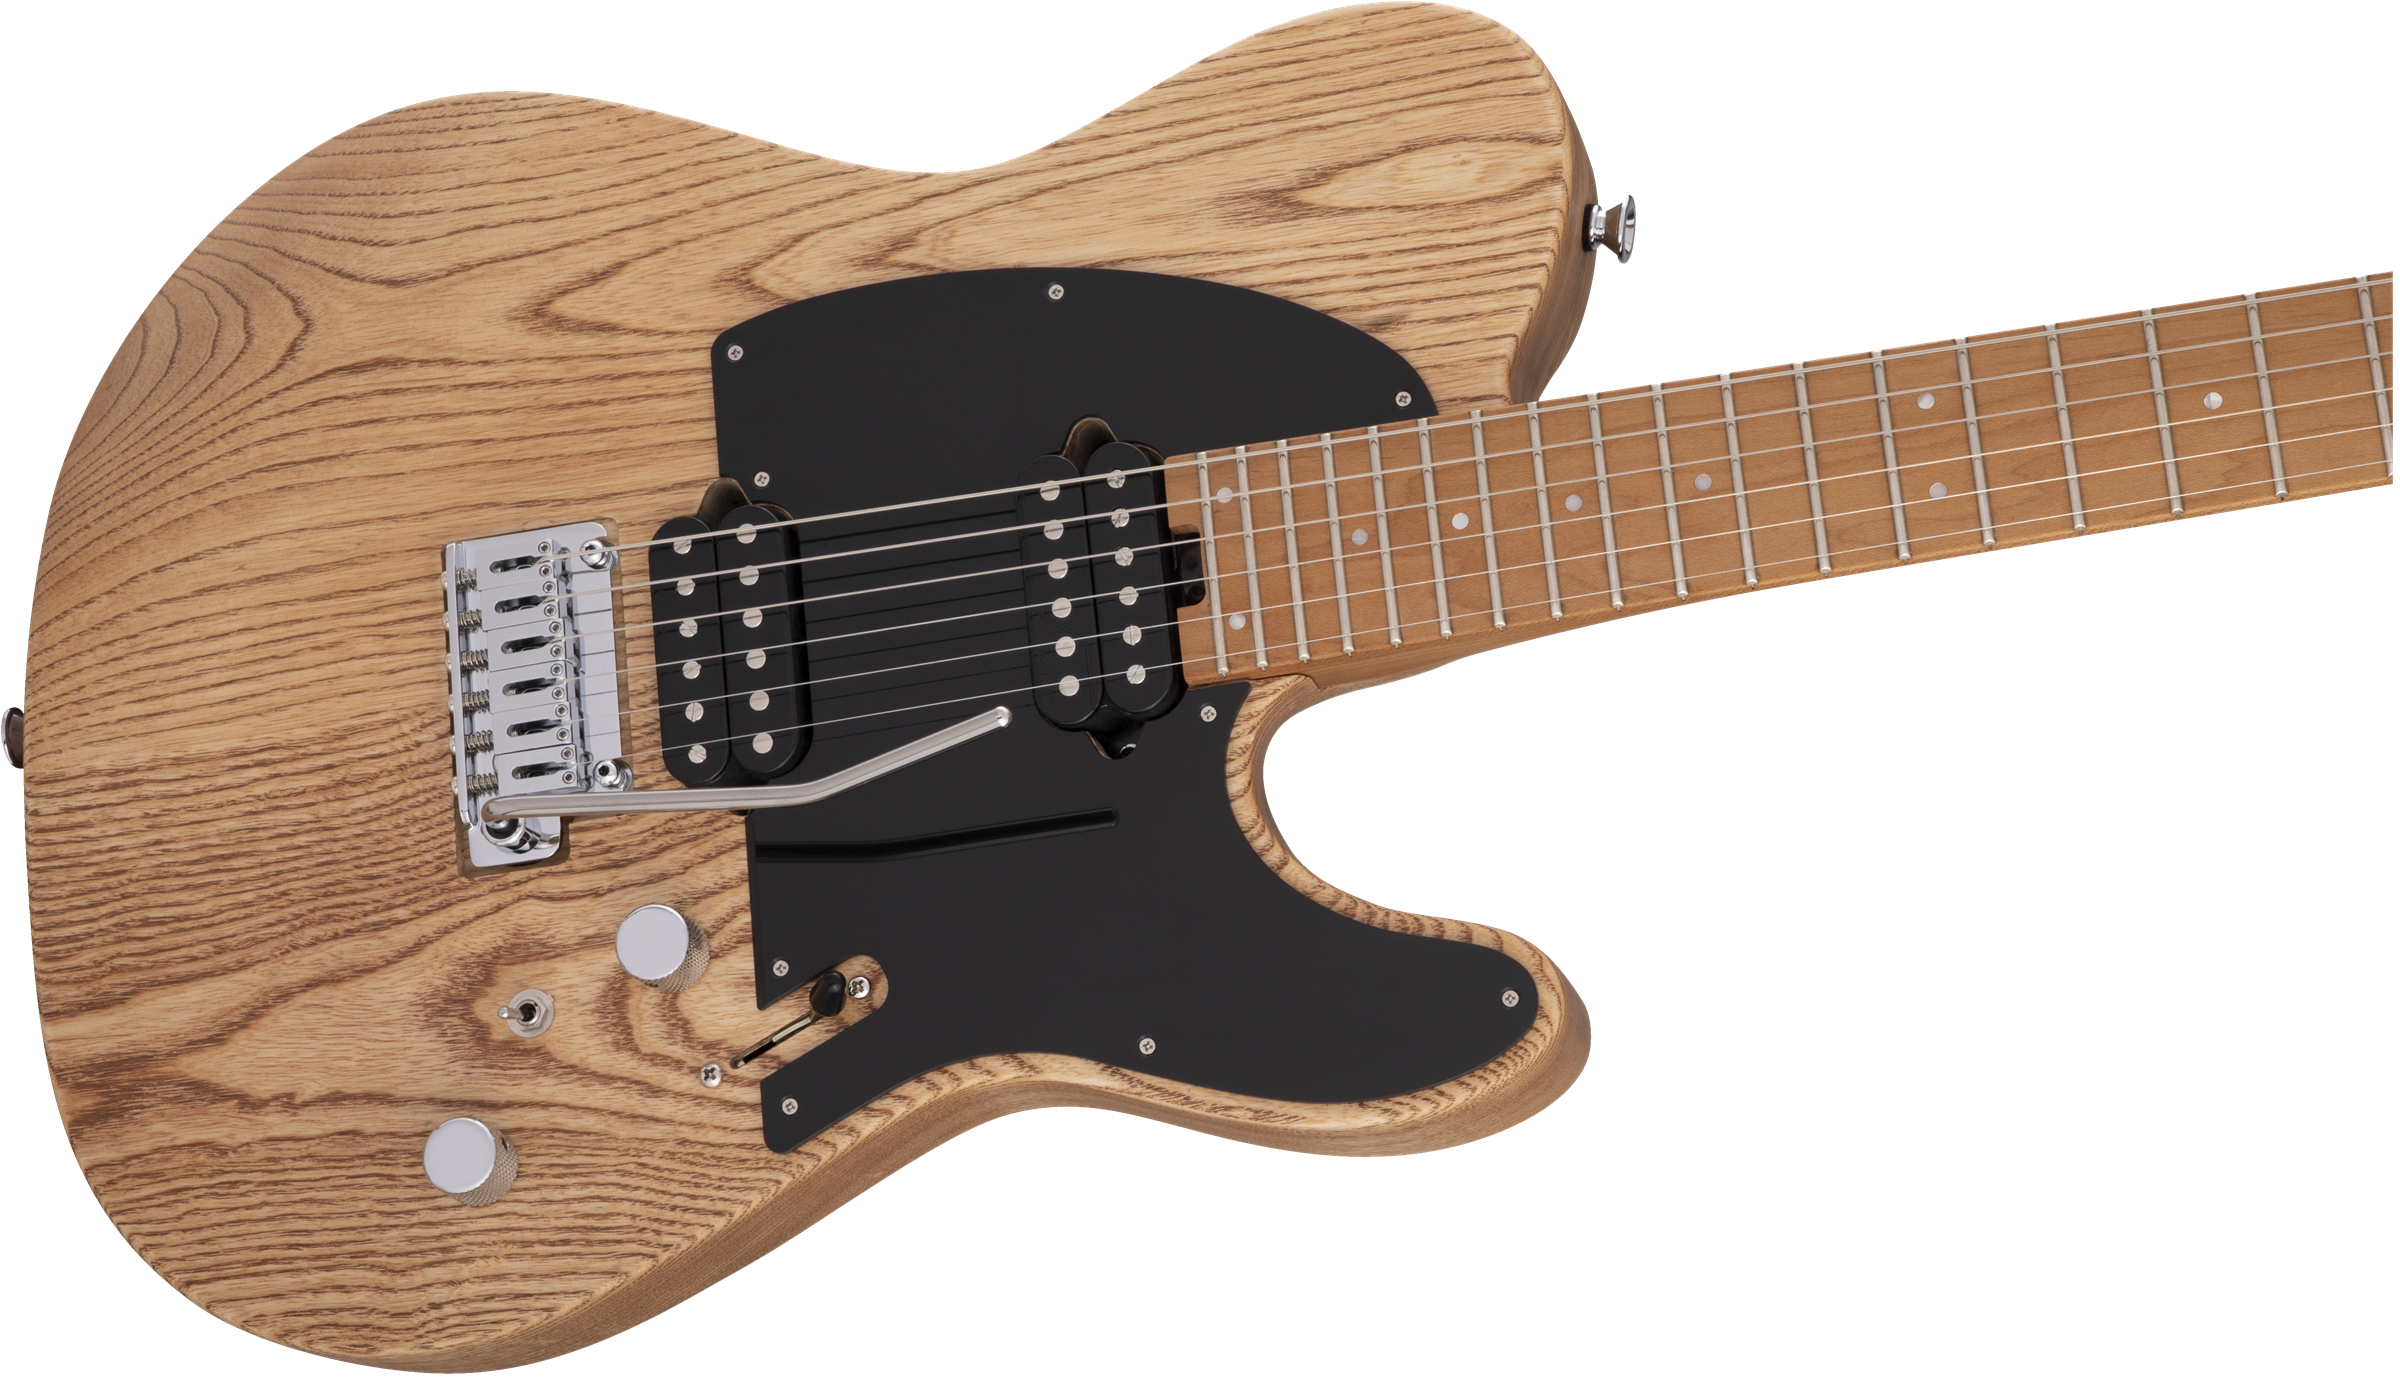 Charvel Pro-Mod So-Cal Style 2 24 HH 2PT CM Ash Caramelized Maple Fingerboard Natural Ash 2966511557 SERIAL NUMBER MC22002257 - 7.6 LBS